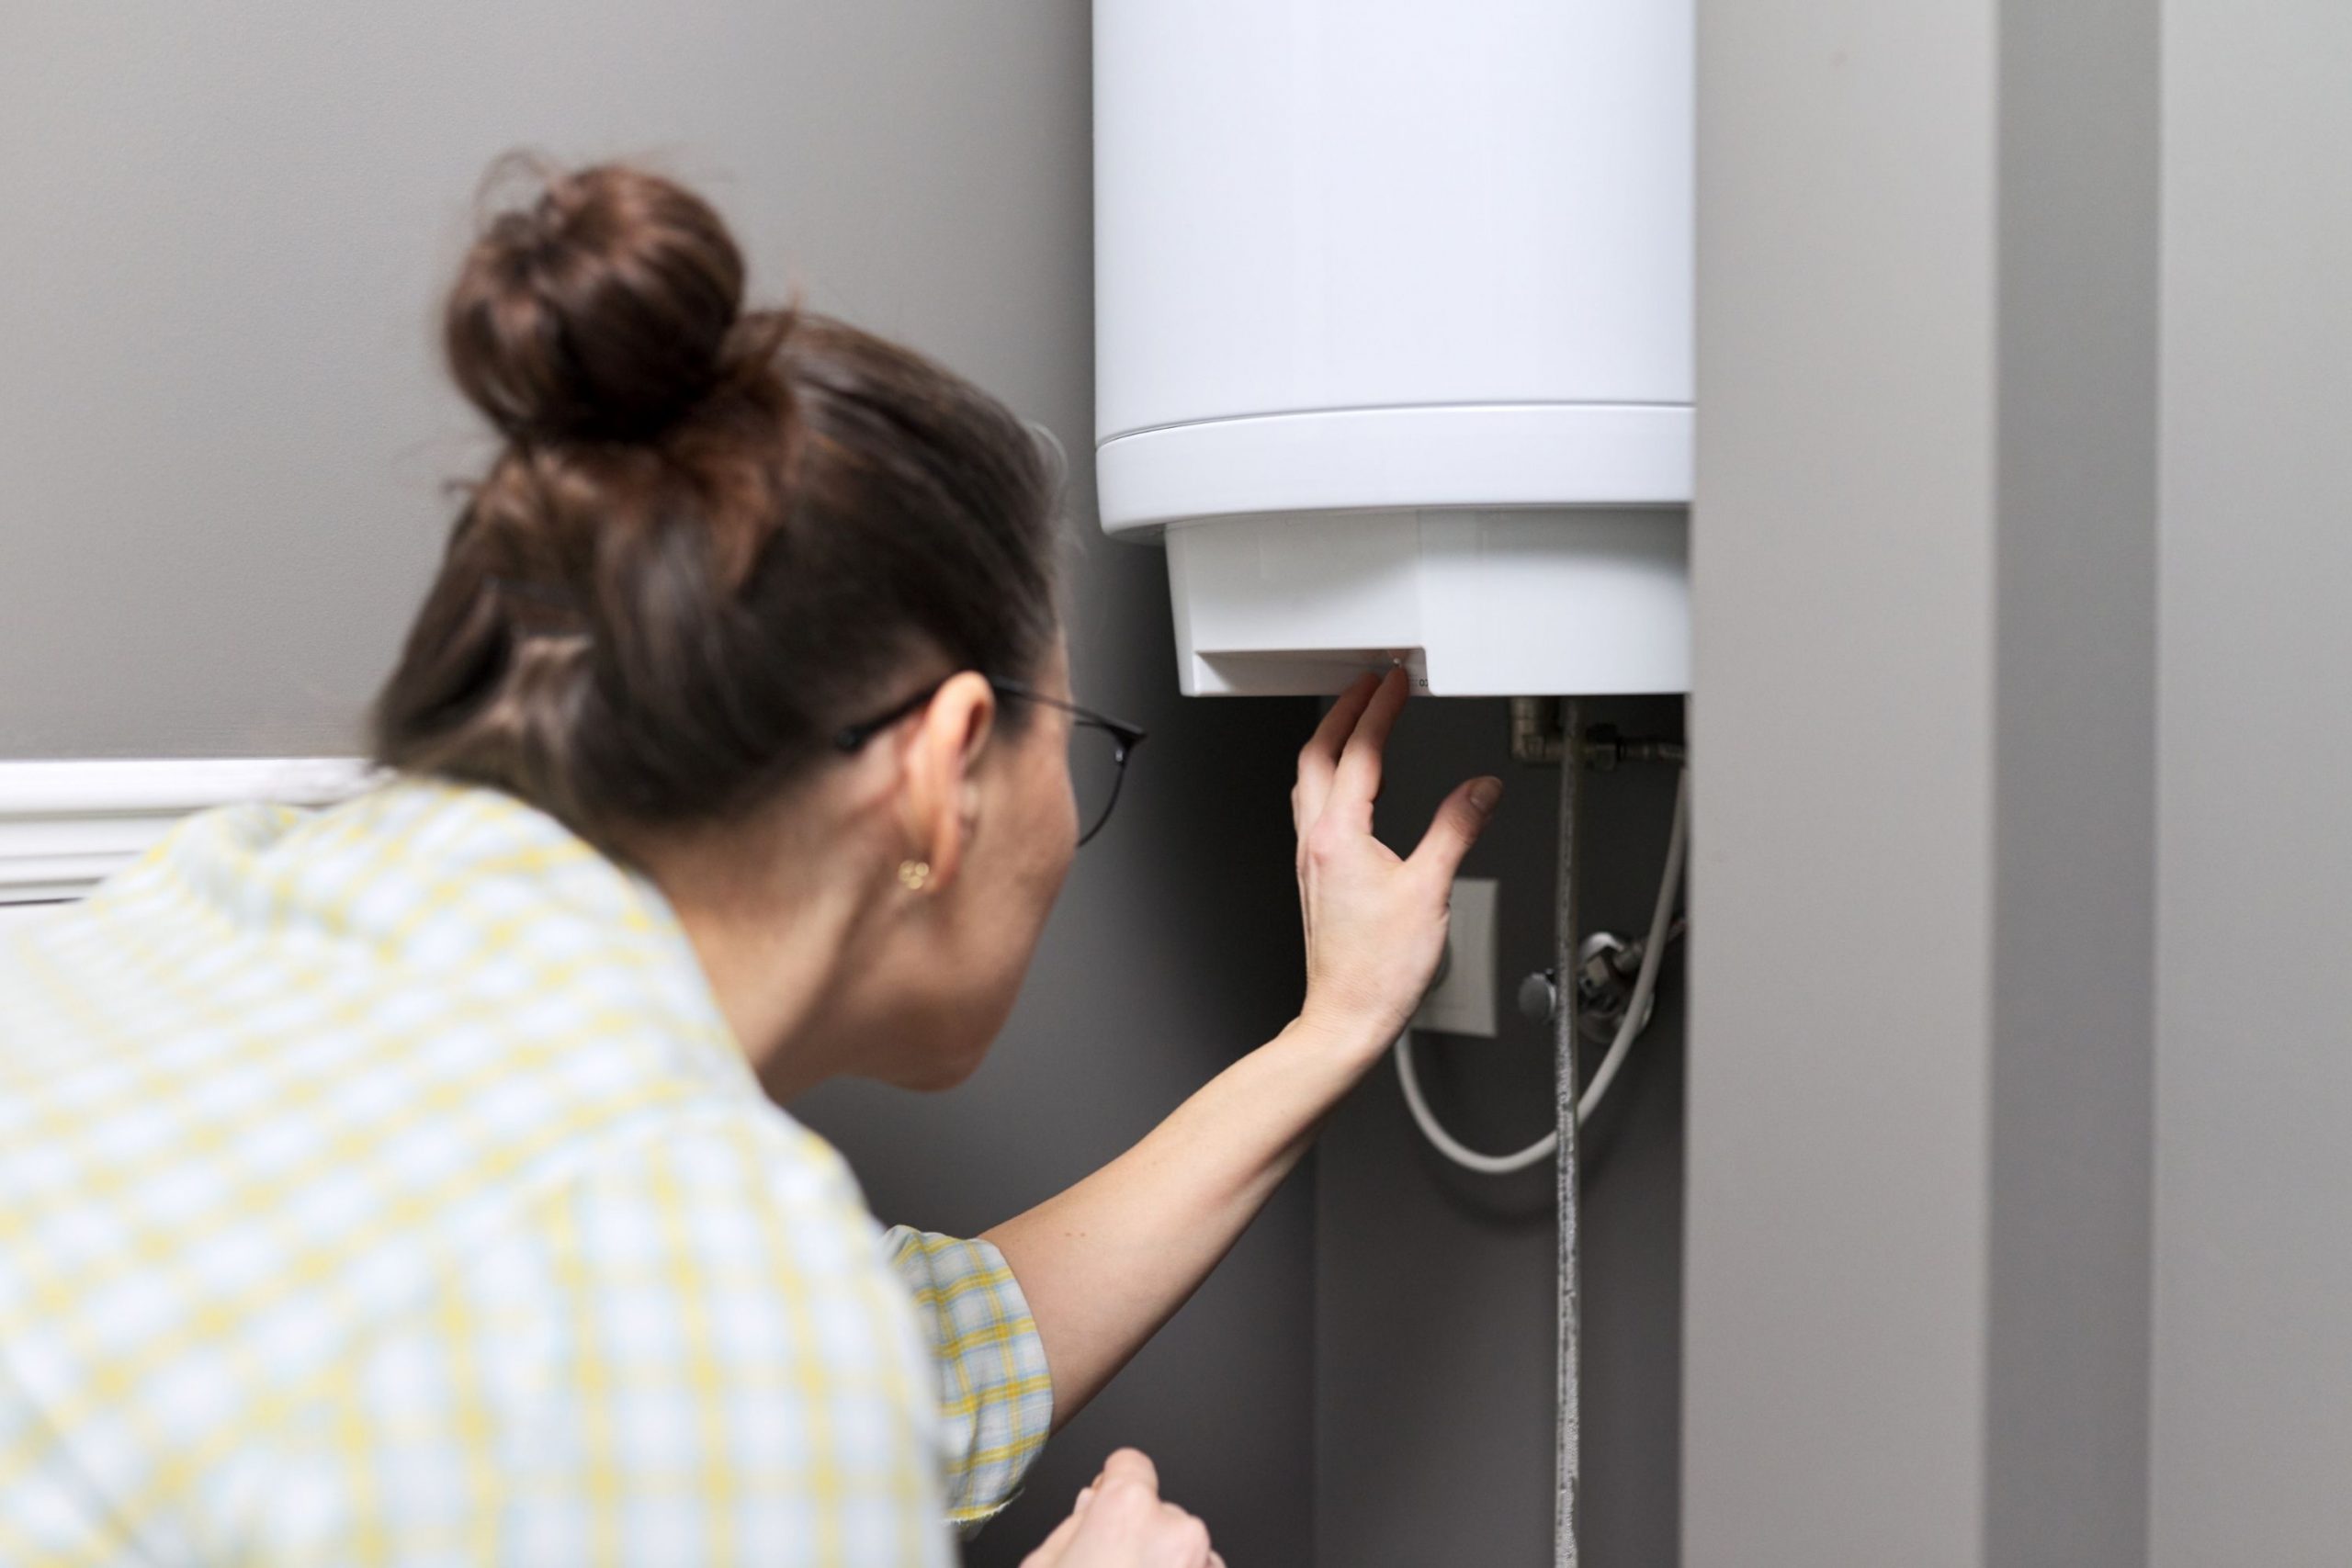 How to Turn Off a Pilot Light On Water Heater